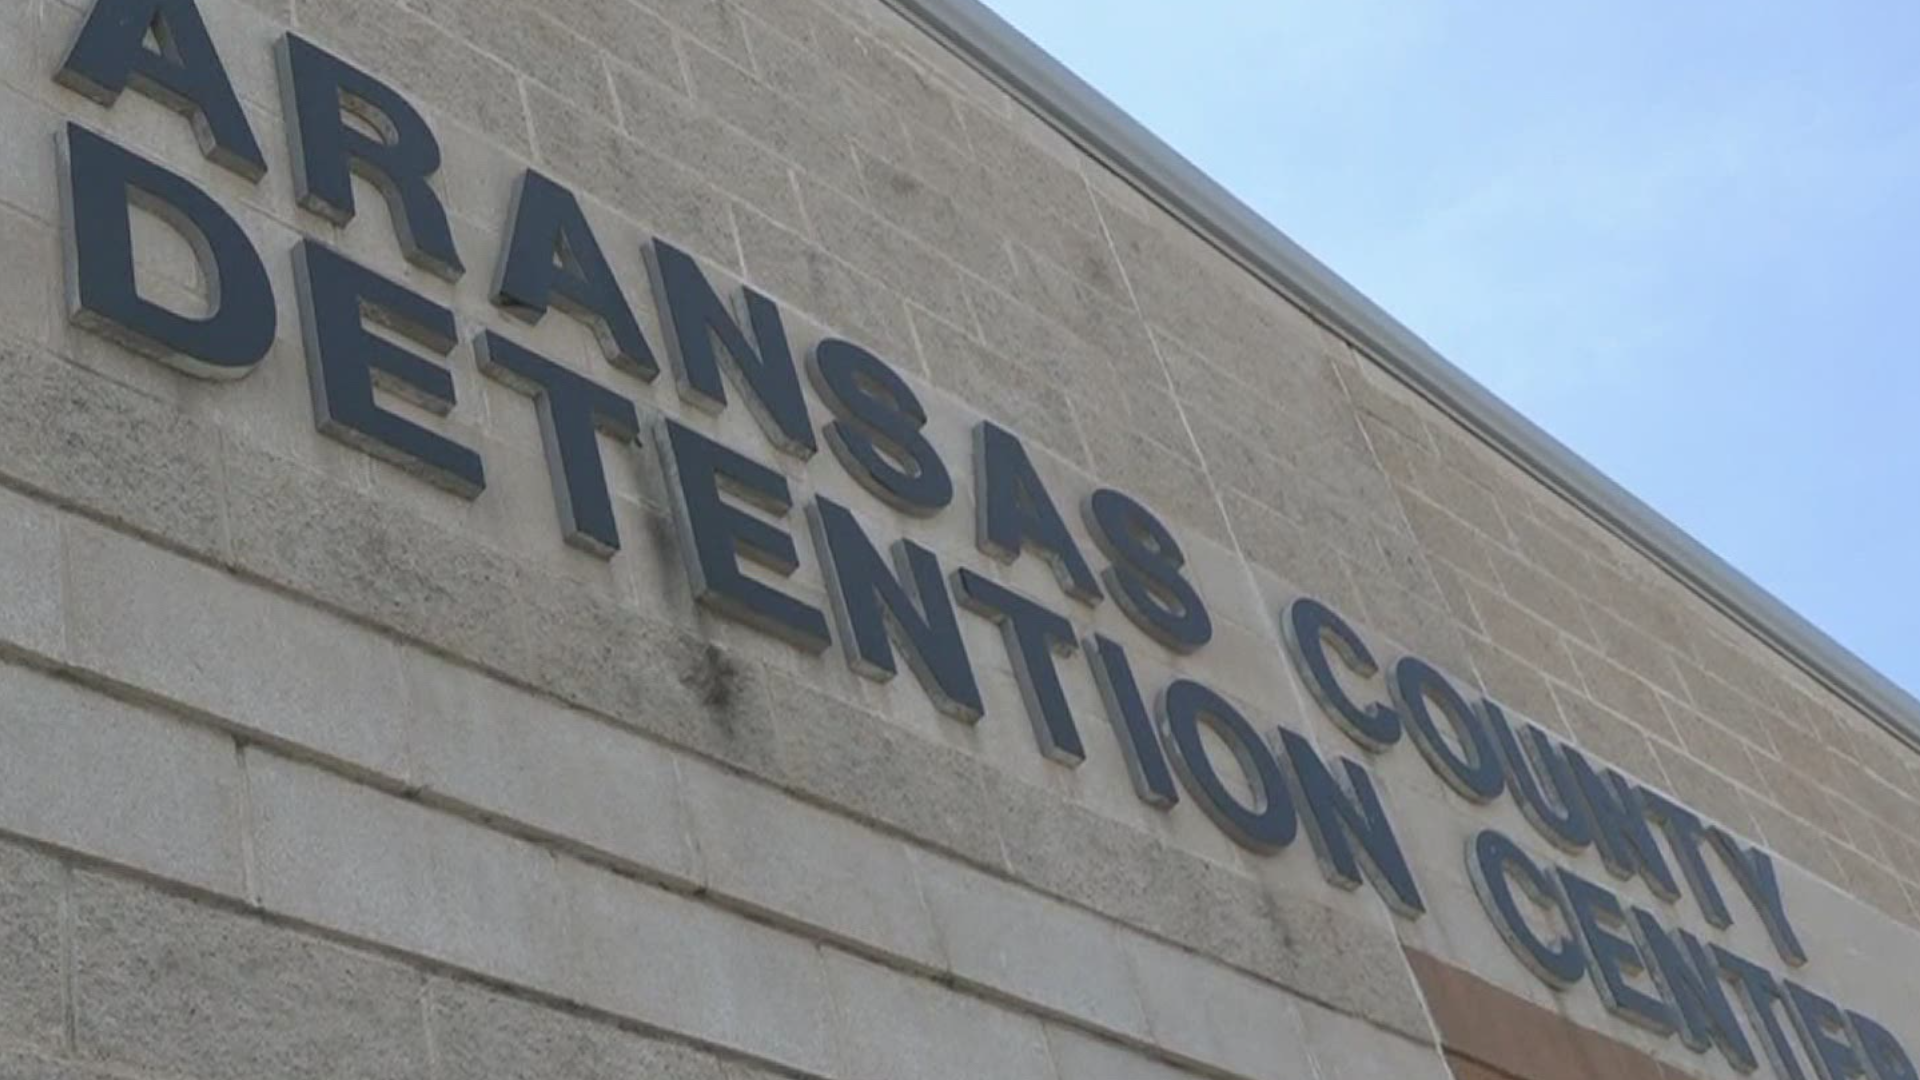 Officials with the Aransas County Sheriff's Office said they hope to set an example for other counties by getting their inmates vaccinated.